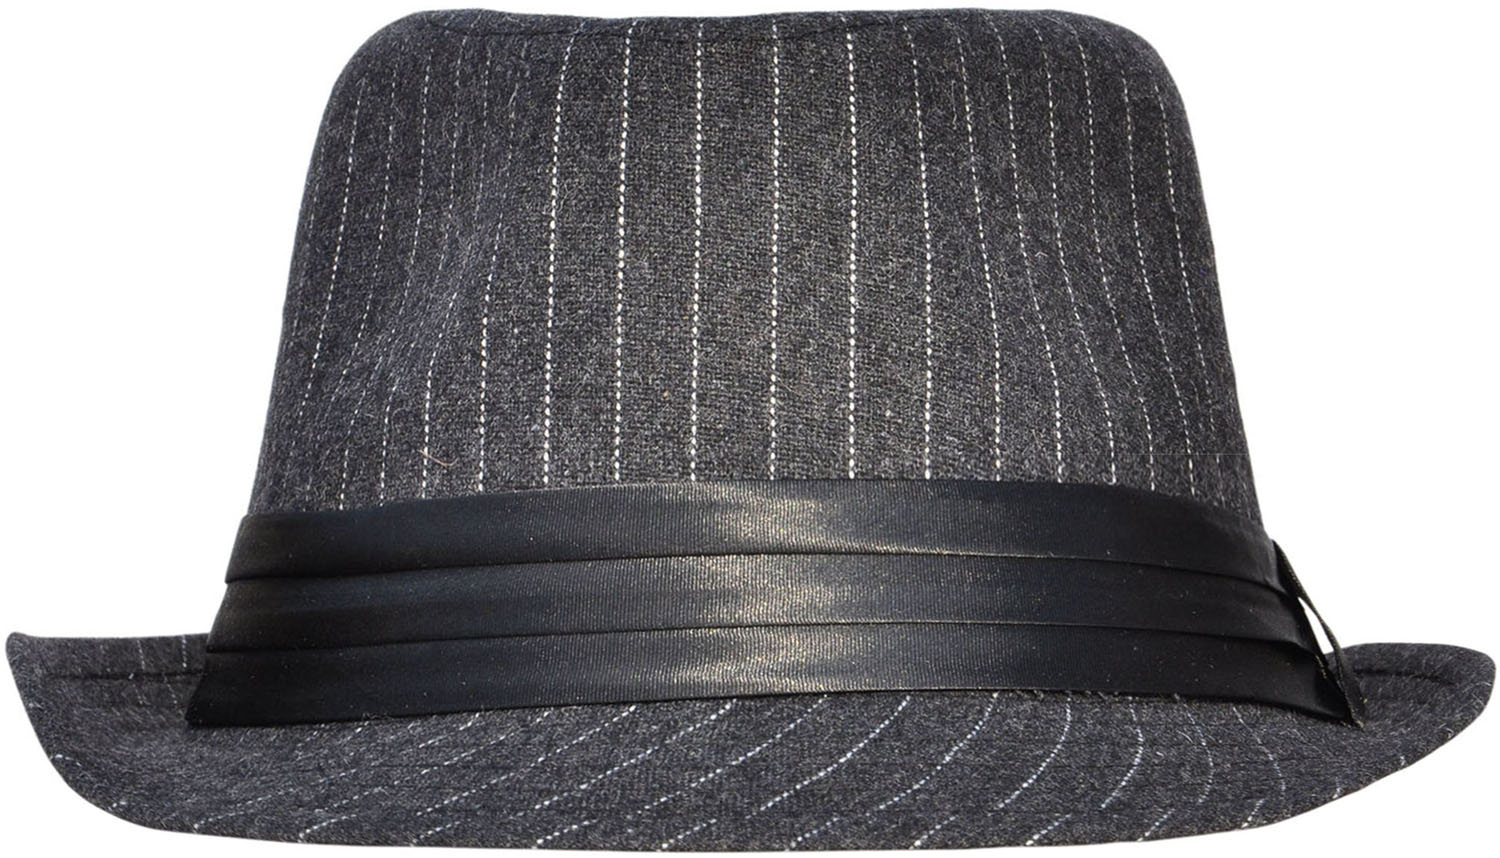 Simplicity Unisex Structured Gangster Trilby Wool Fedora Hat, 3075_Charcoal Gy - image 2 of 4